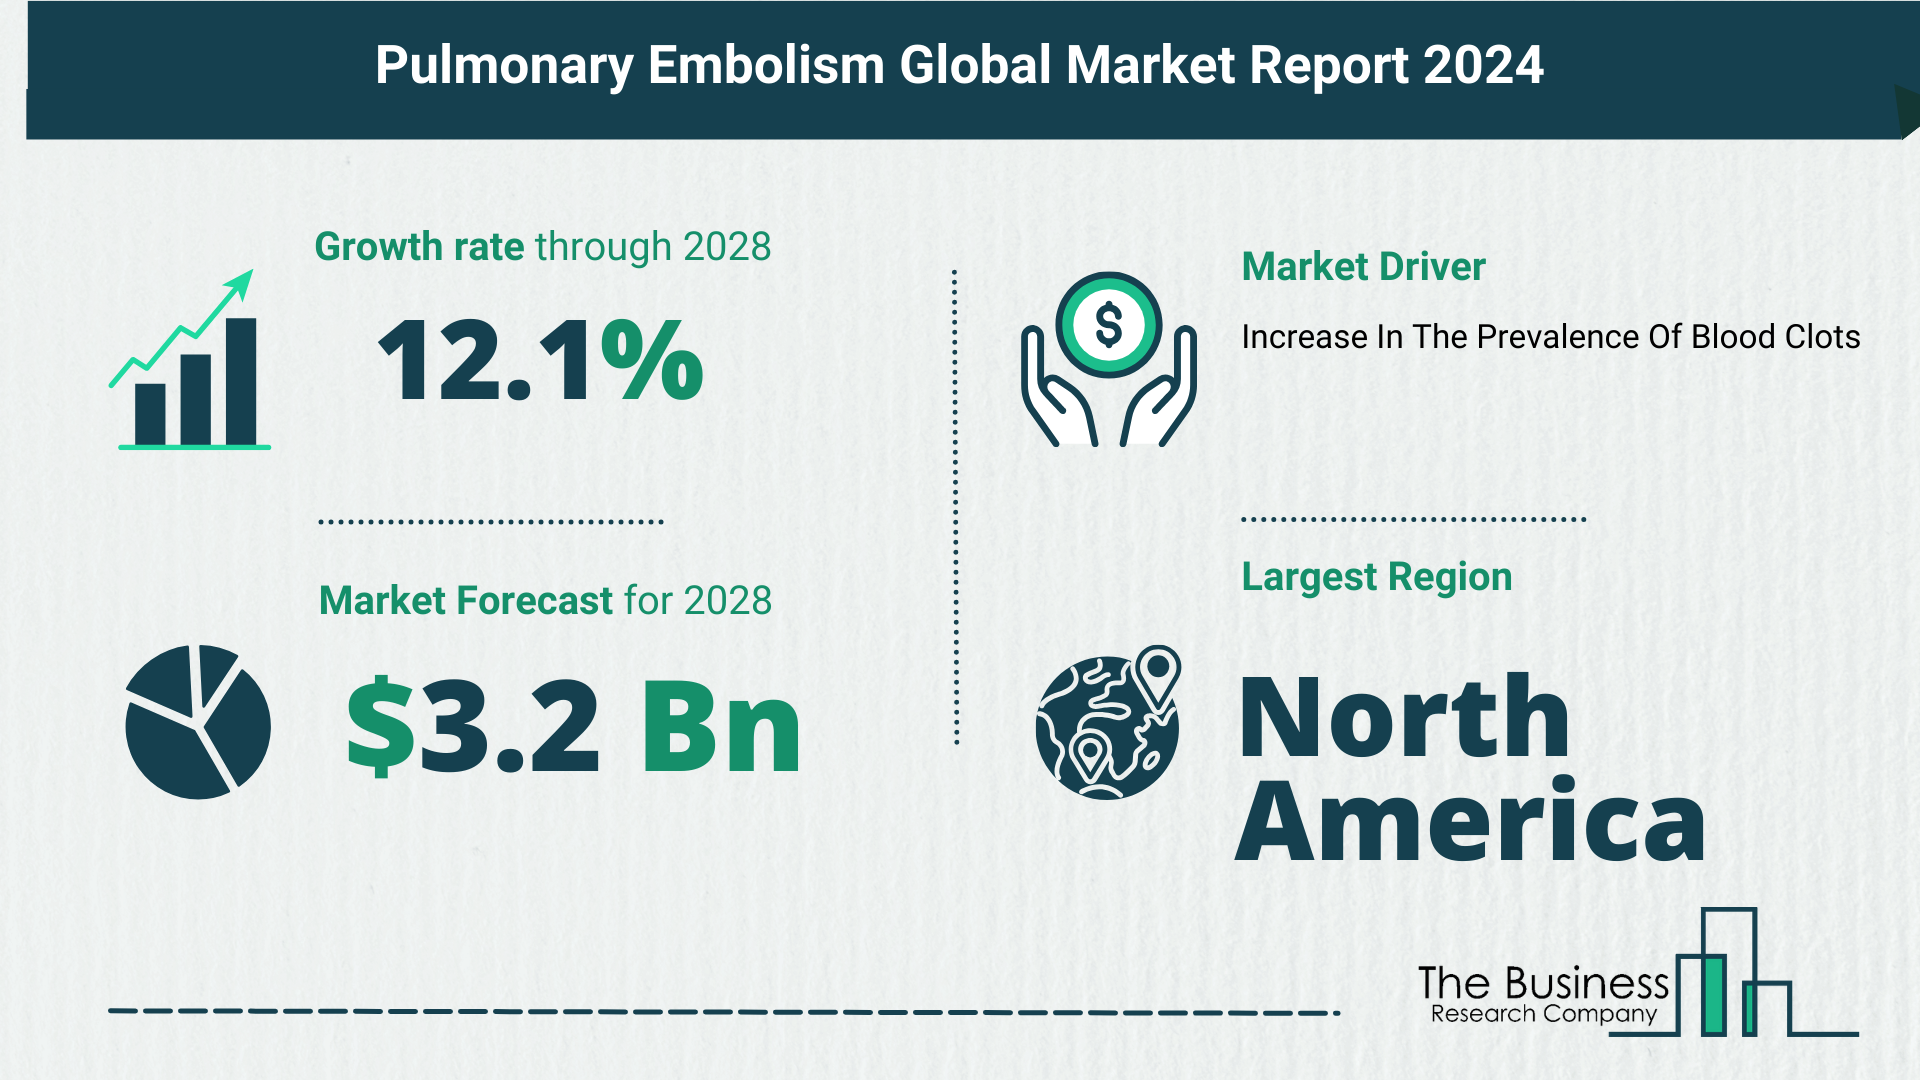 How Is The Pulmonary Embolism Market Expected To Grow Through 2024-2033